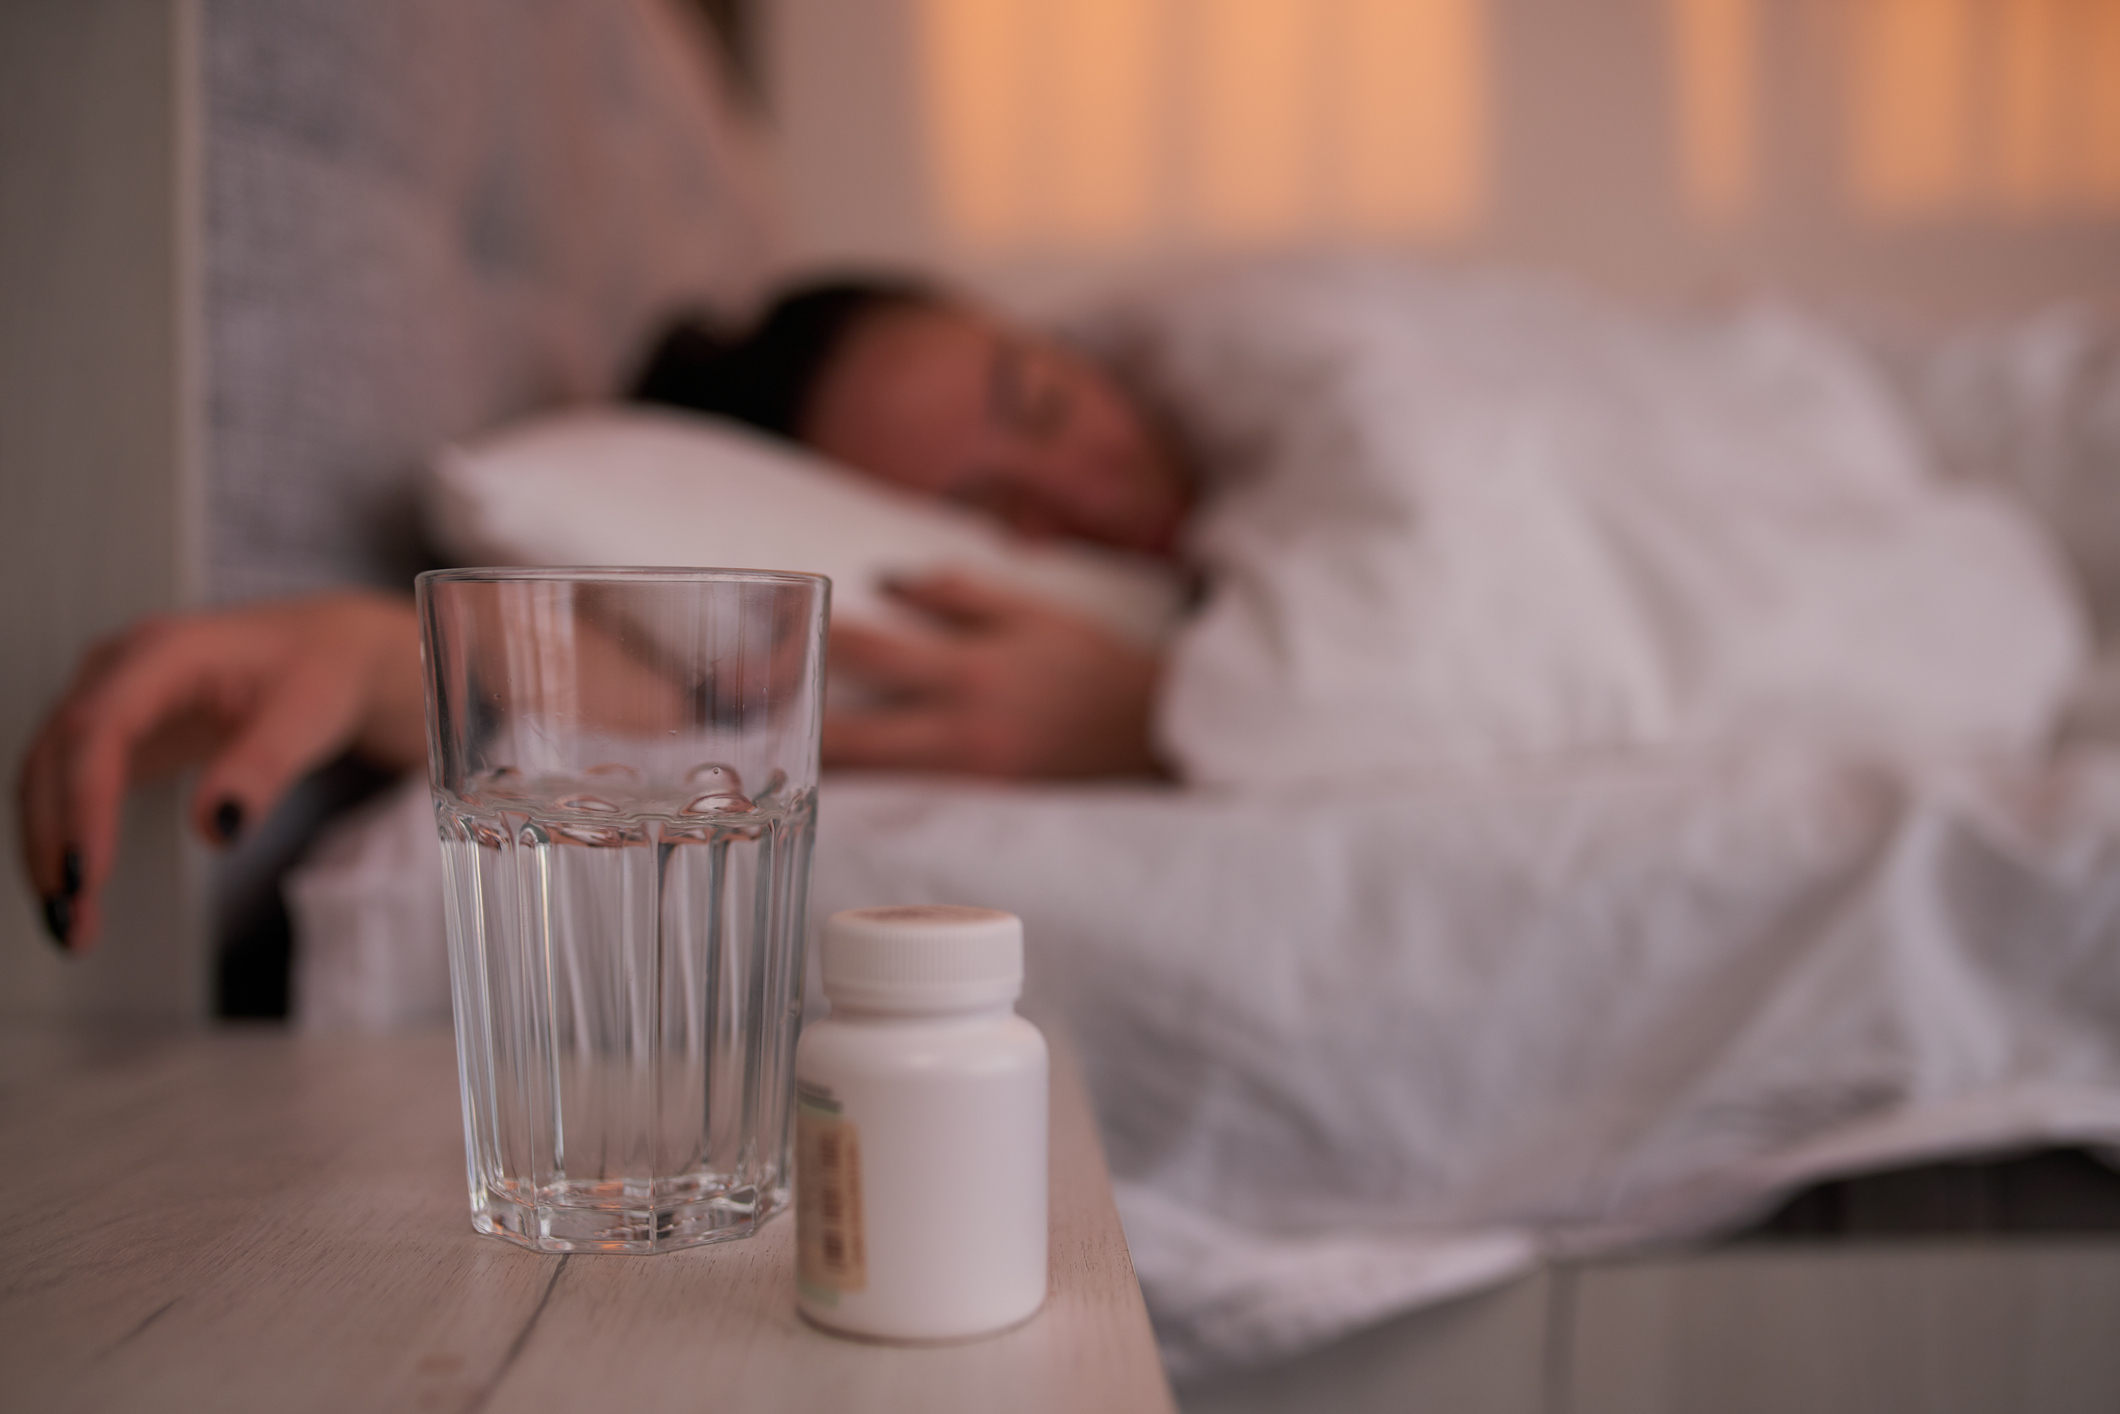 A person sleeping in bed with a glass of water and a pill bottle on the night table